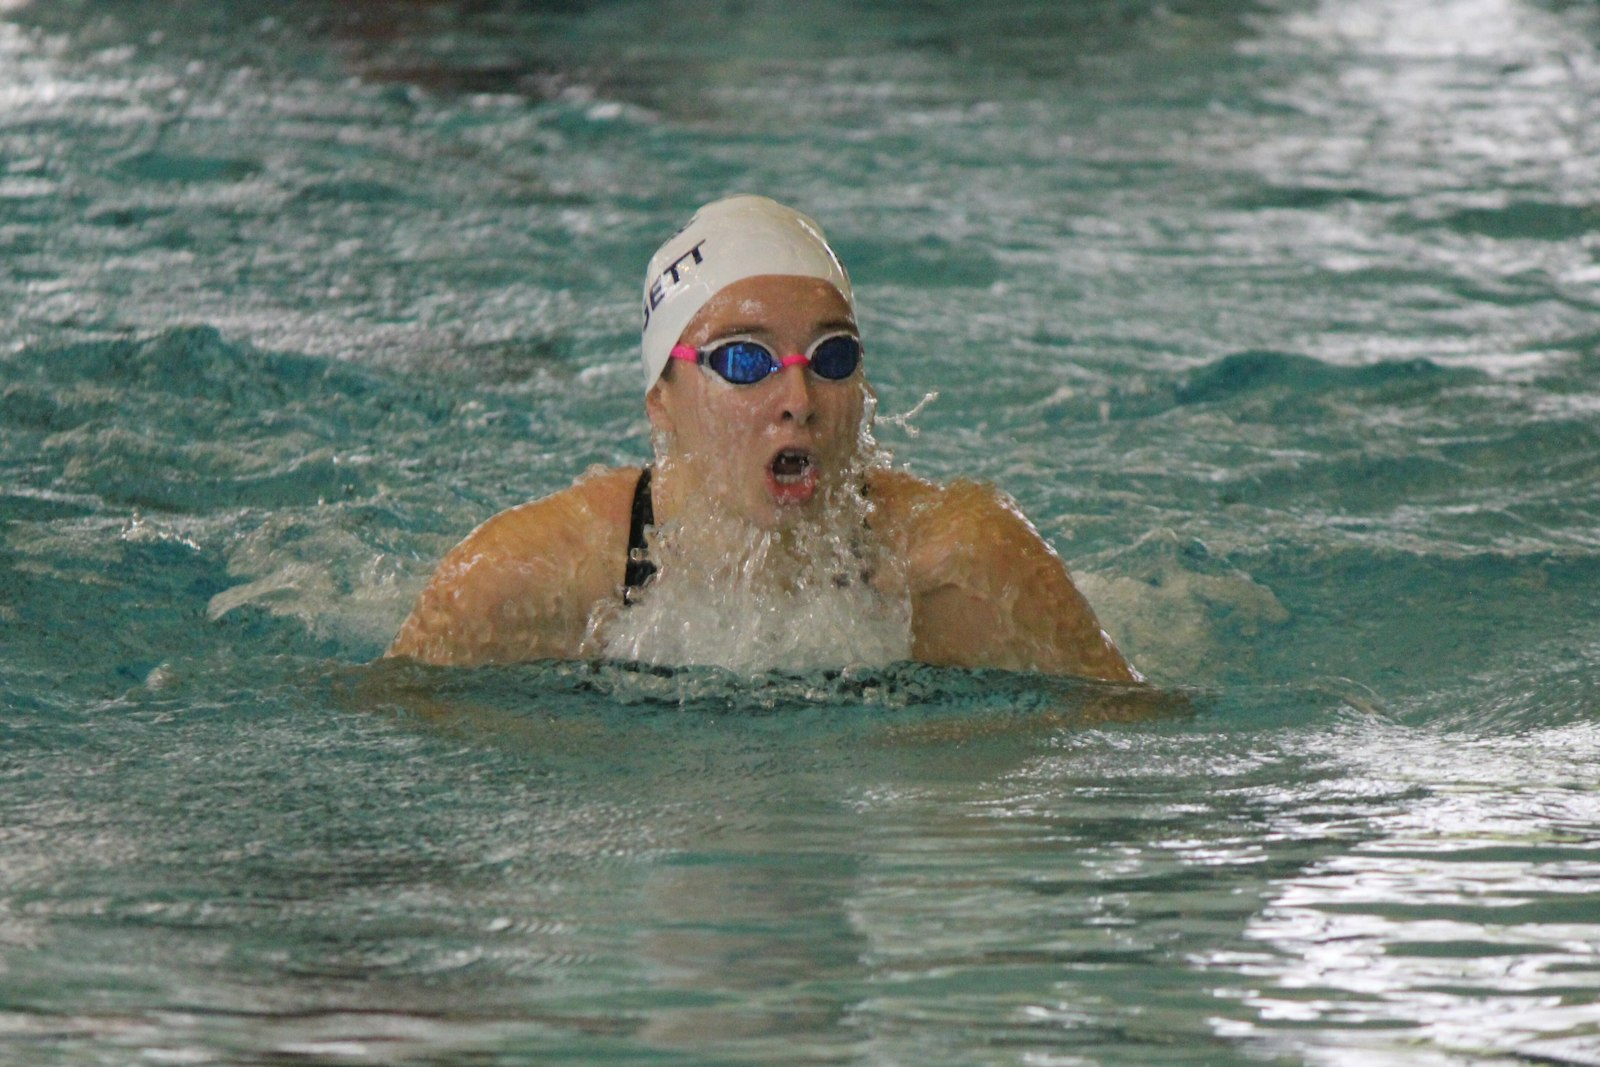 Grosse Pointe Woods University-Liggett’s Ginger McMahon set a new Catholic League record in the 100-yard breaststroke. Her top time was 1:04.24, nearly a full second faster than the old mark which had stood for 10 years.